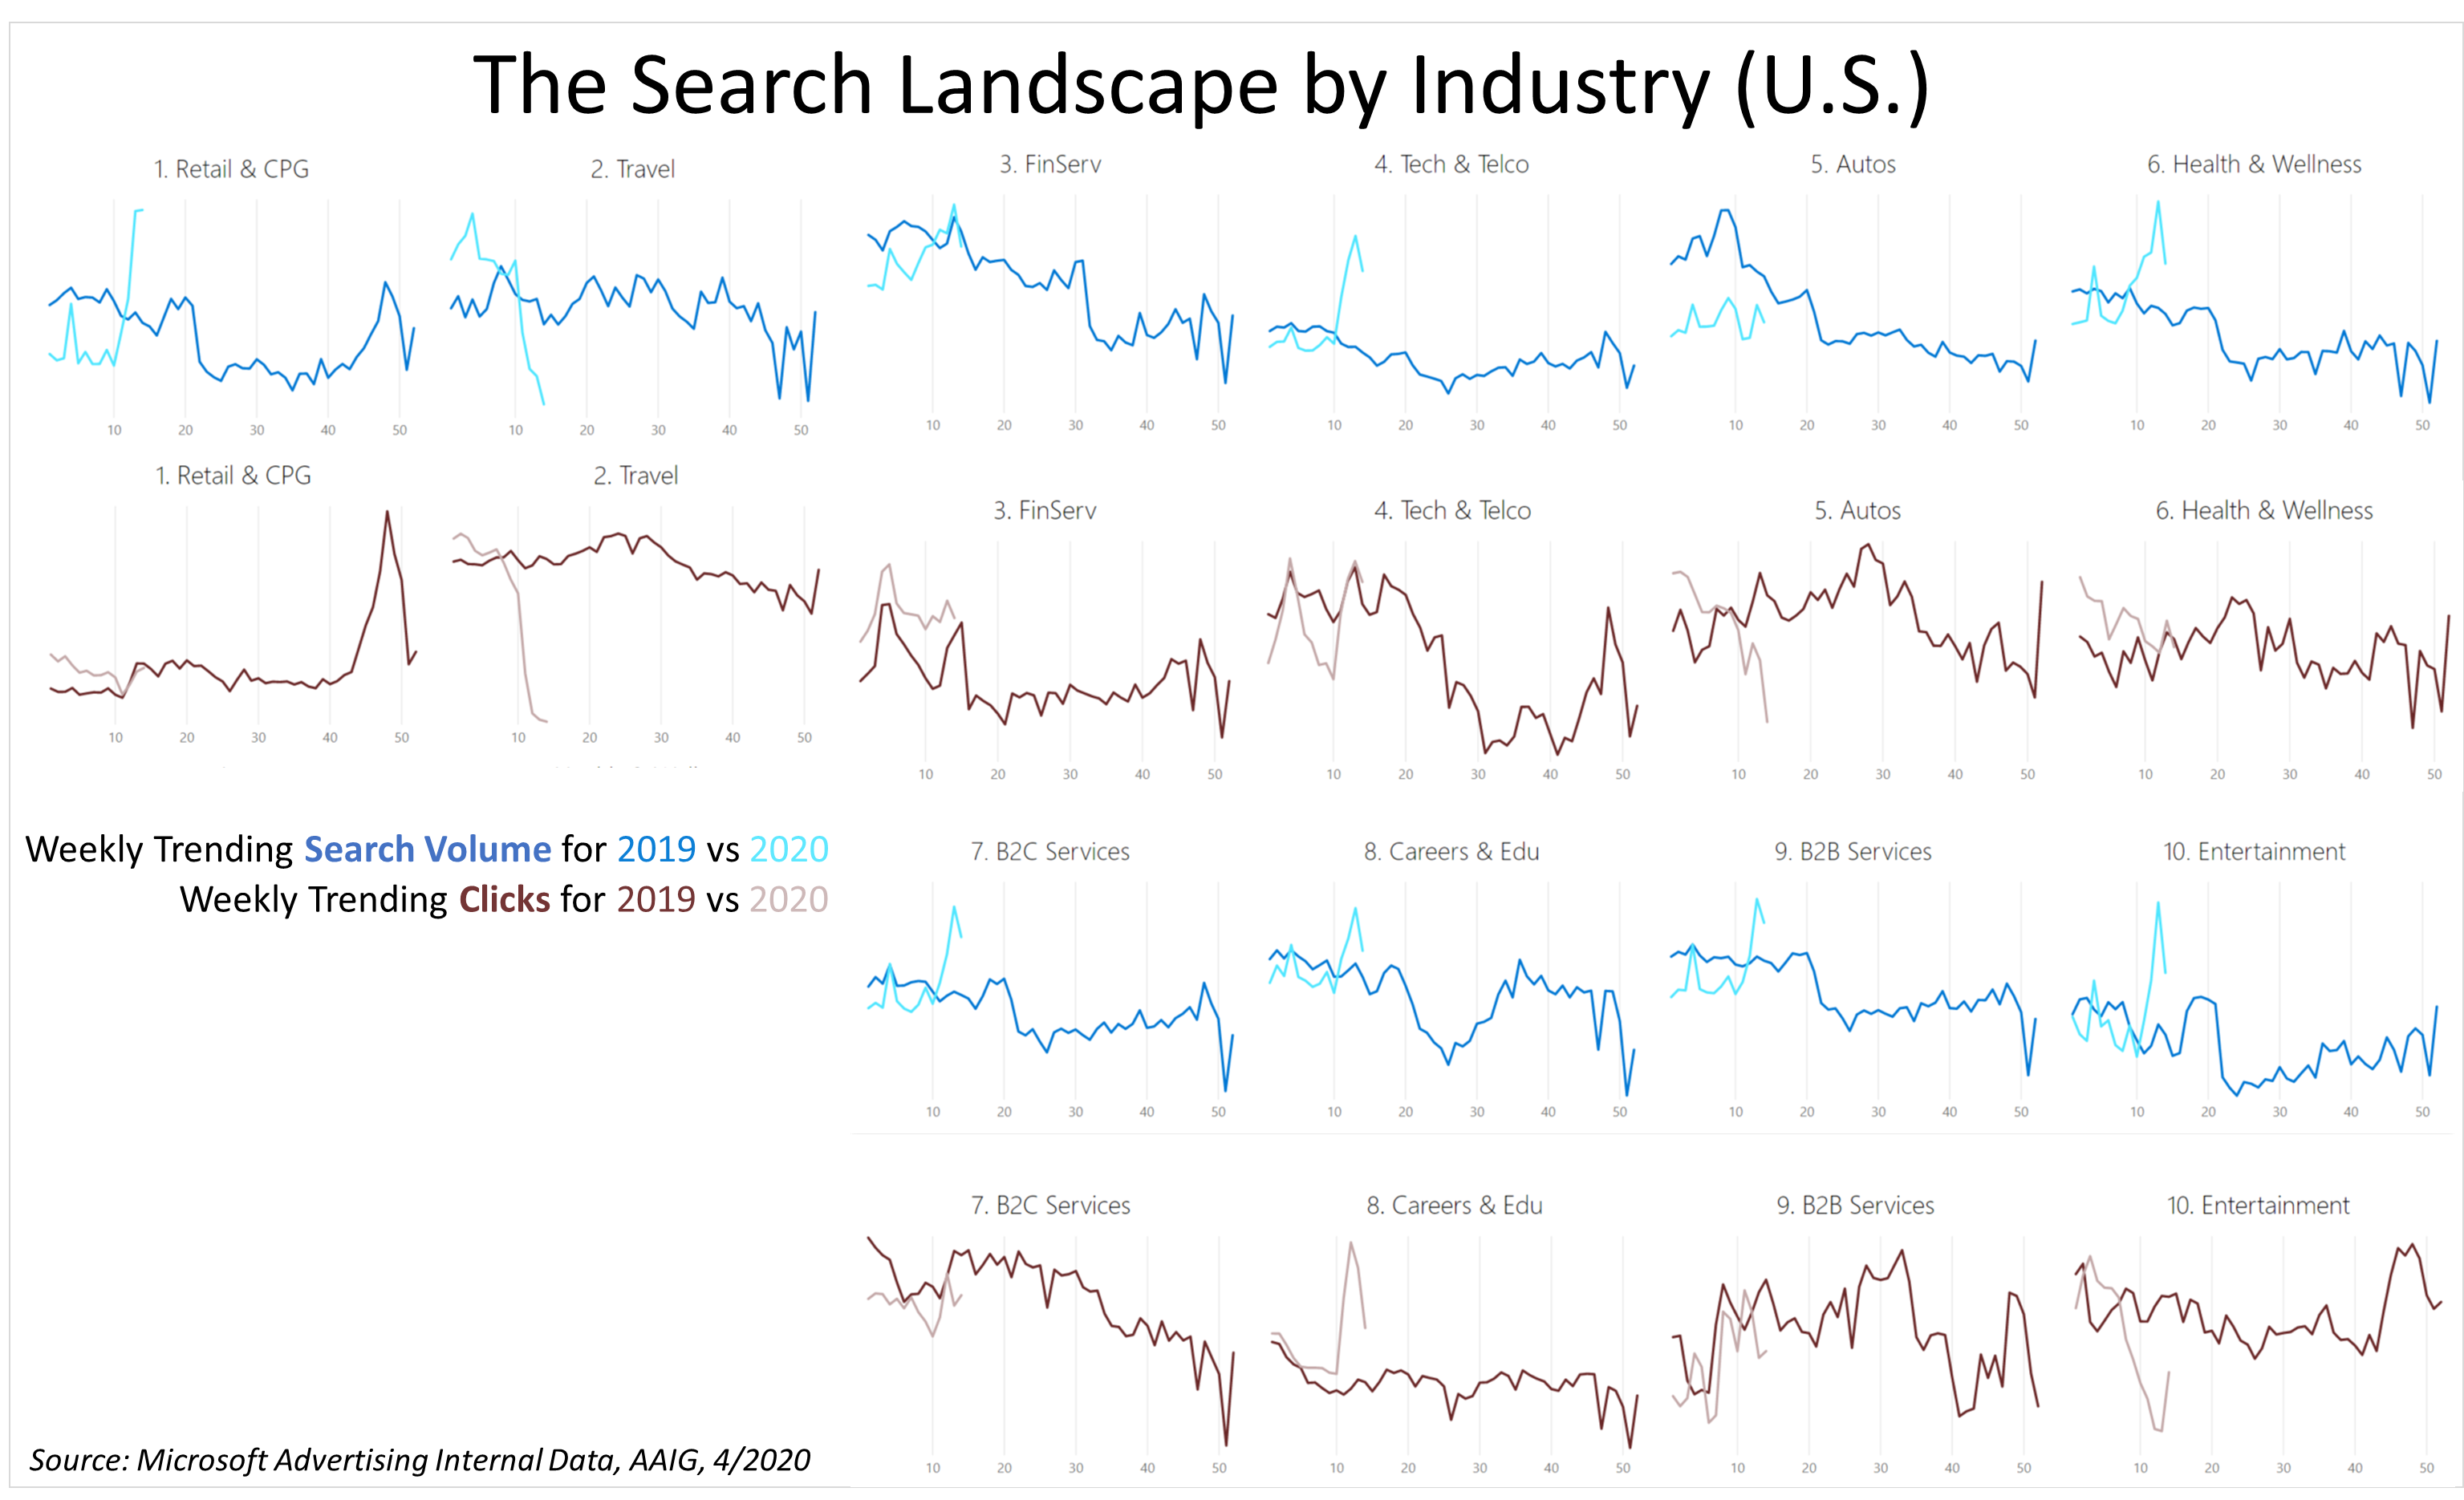 The US Search Industry Landscape outlining the year over year changes in search volume and clicks for the top 10 industries on Microsoft Advertising.